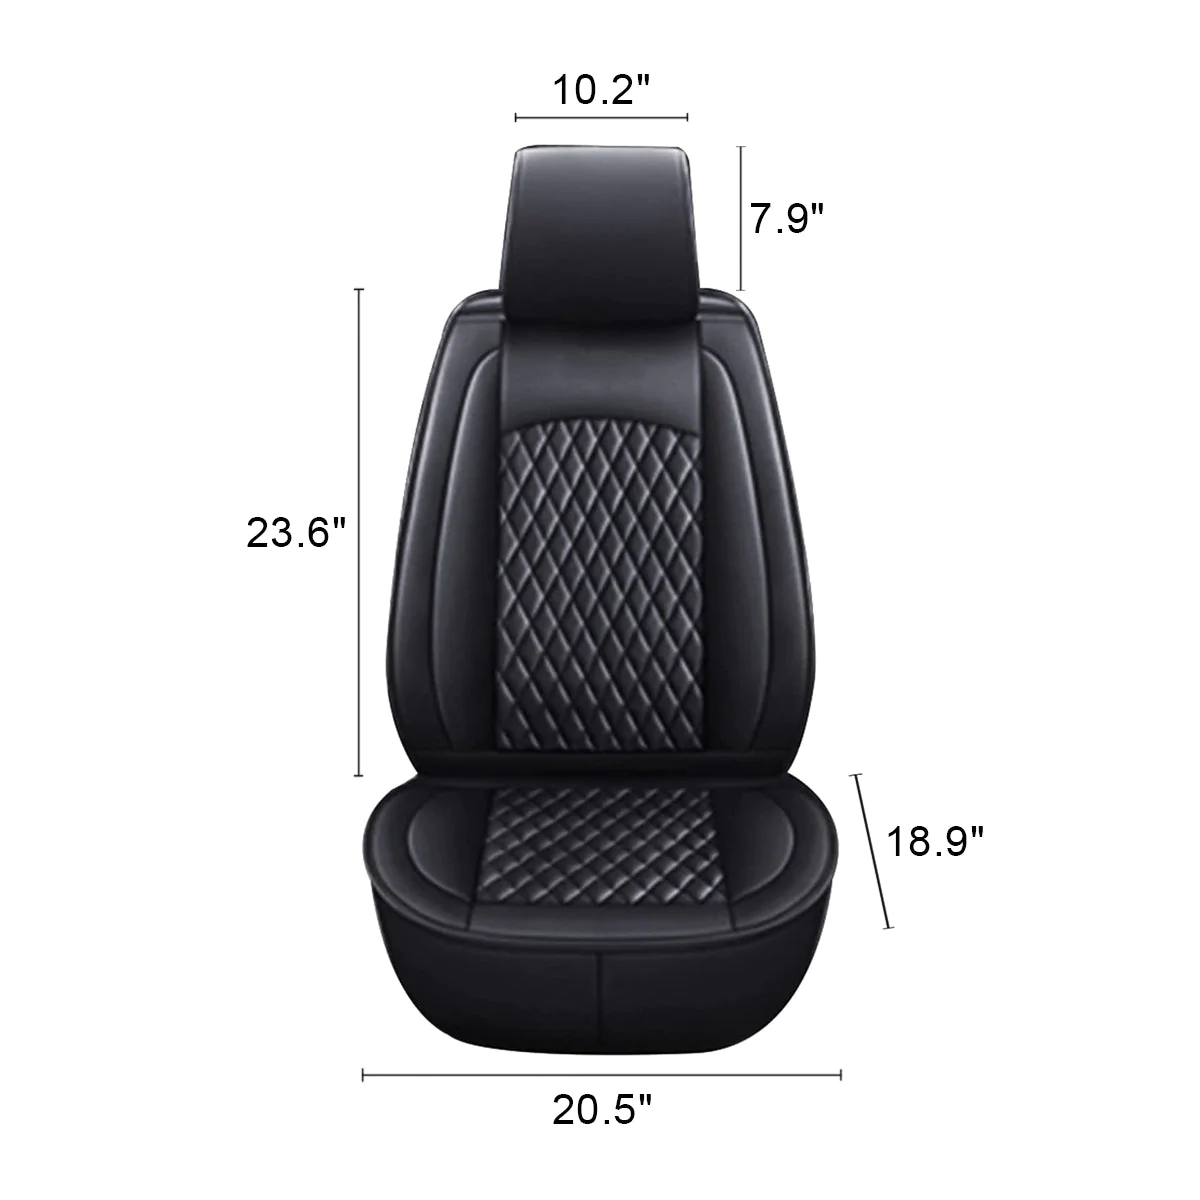 Custom Text For Seat Covers 5 Seats Full Set, Custom Fit For Your Cars, Leatherette Automotive Seat Cushion Protector Universal Fit, Vehicle Auto Interior Decor SA13988